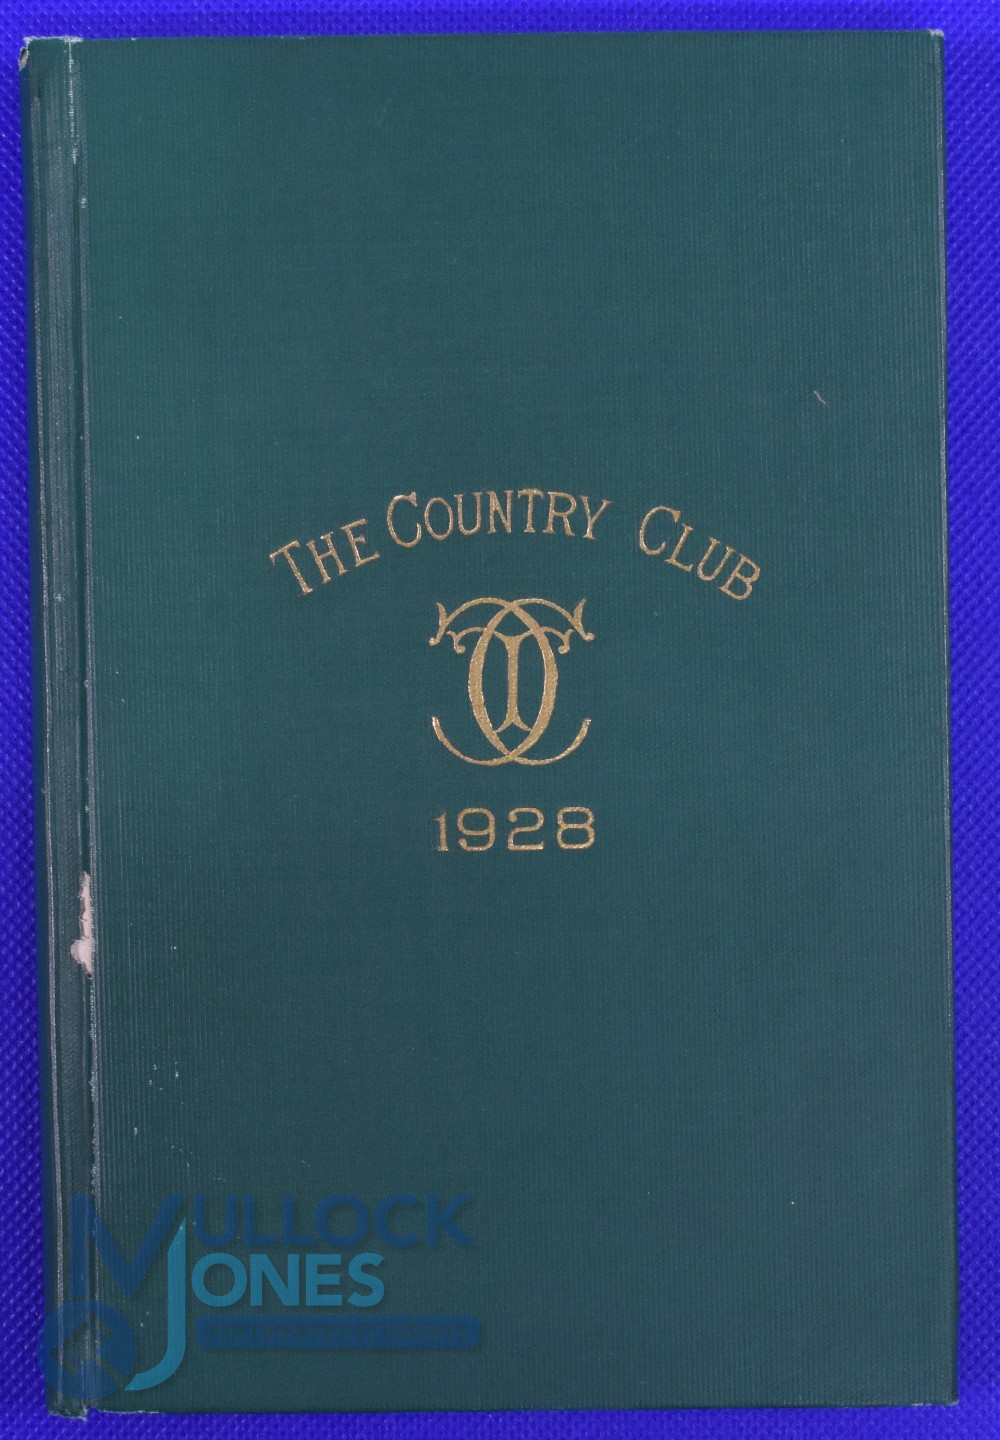 Scarce 1928 The Country Club, Brookline Massachusetts Annual Hand Book - to include golf, Lawn